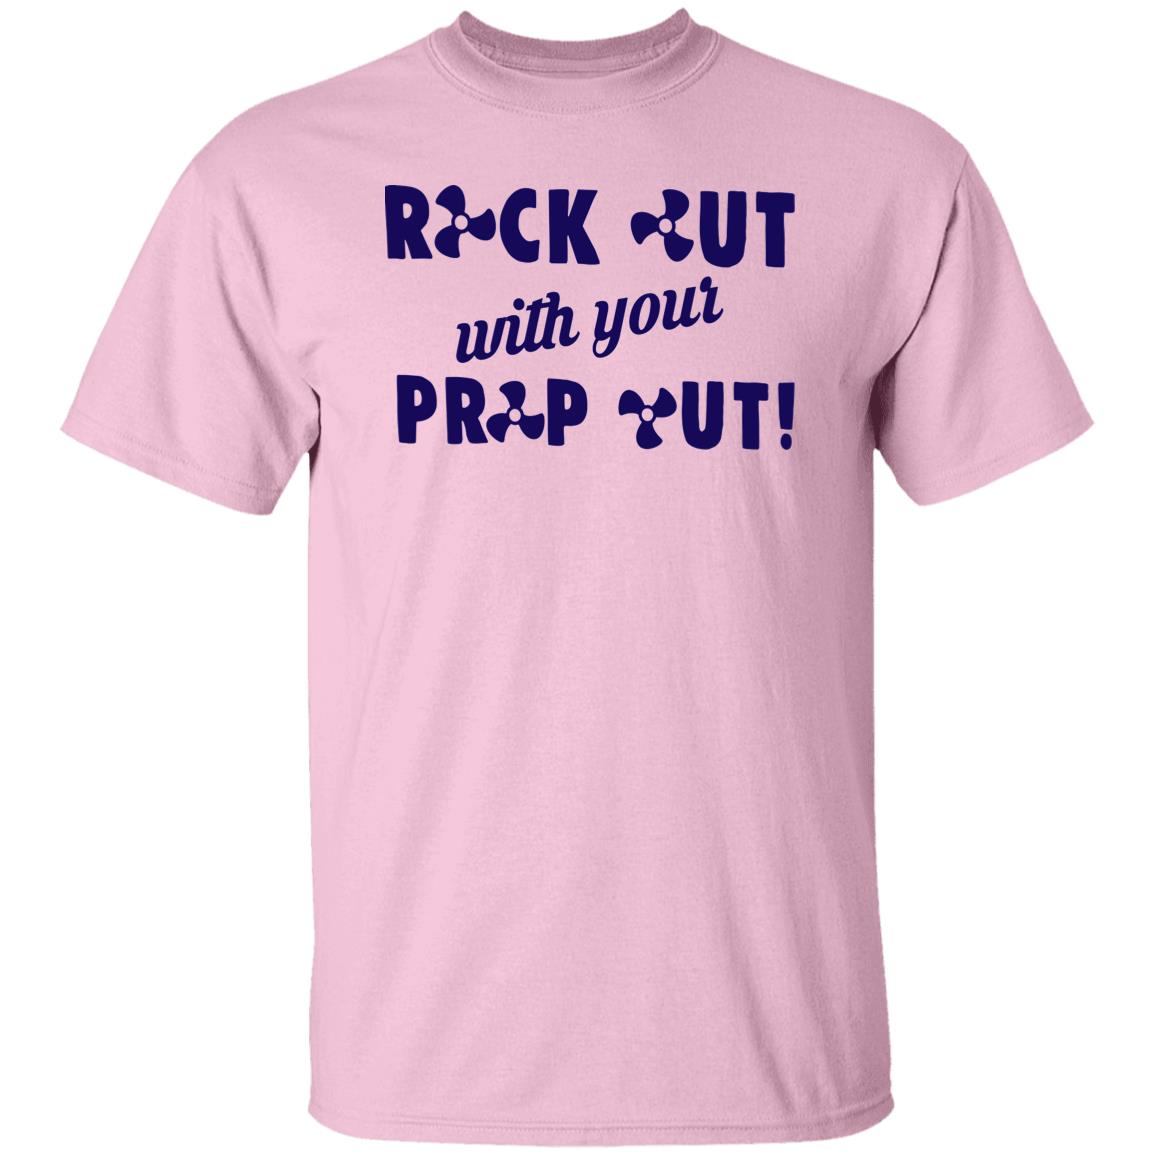 HRCL FL - Navy Rock Out with your Prop Out - 2 Sided G500 5.3 oz. T-Shirt